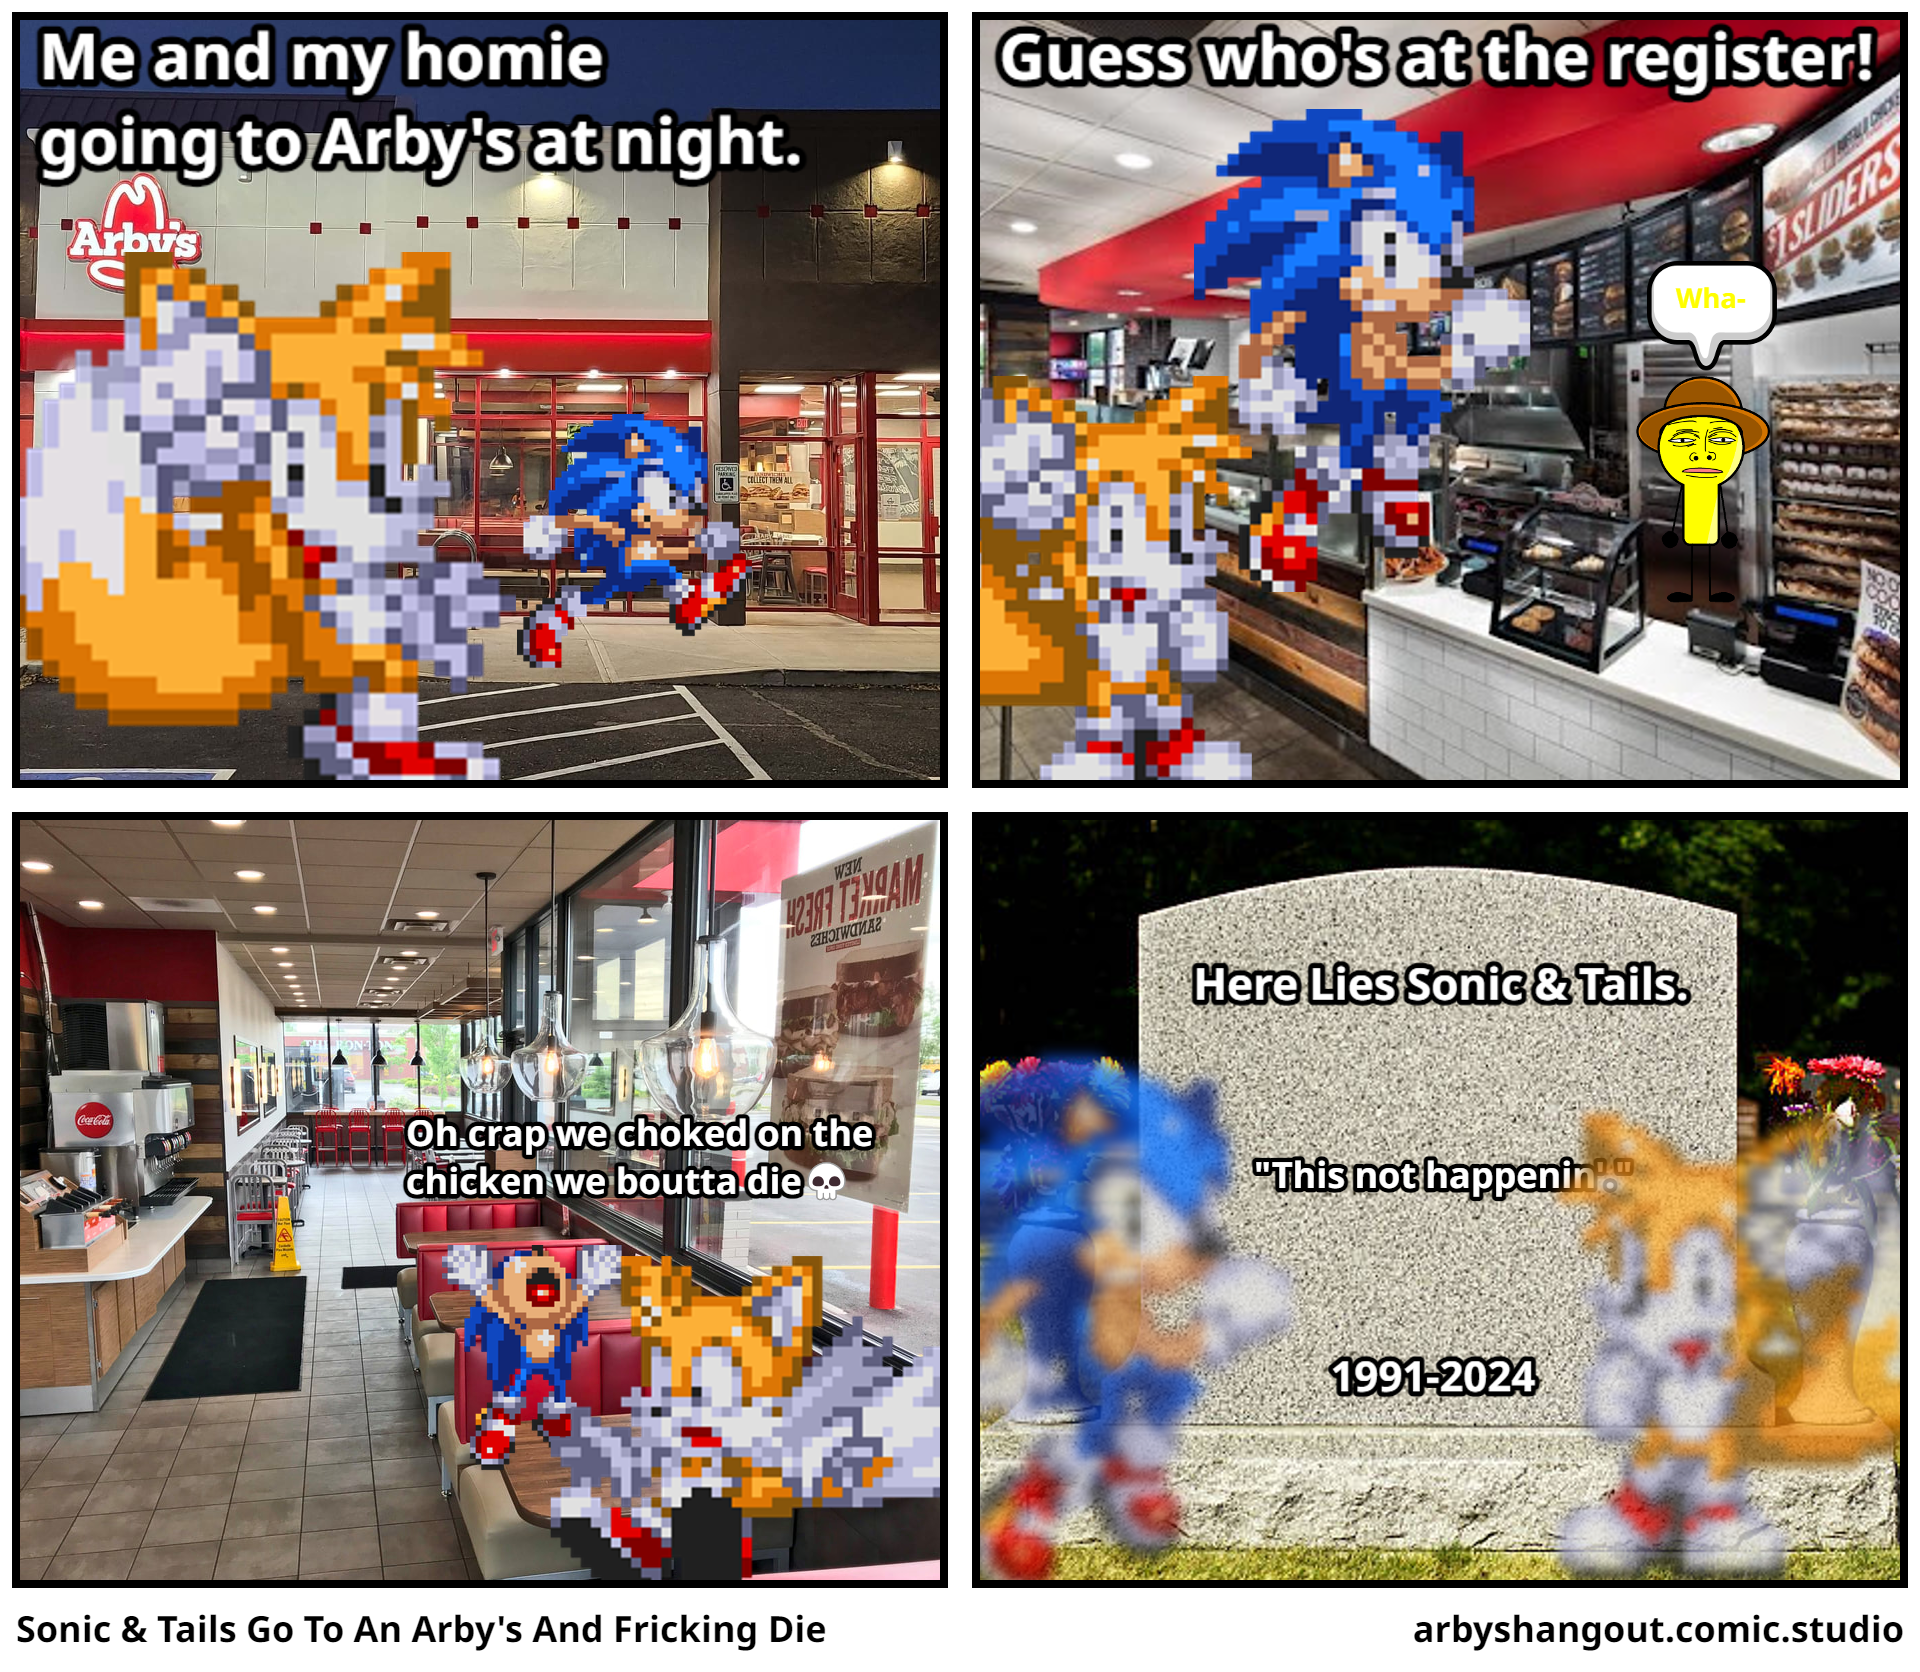 Sonic & Tails Go To An Arby's And Fricking Die